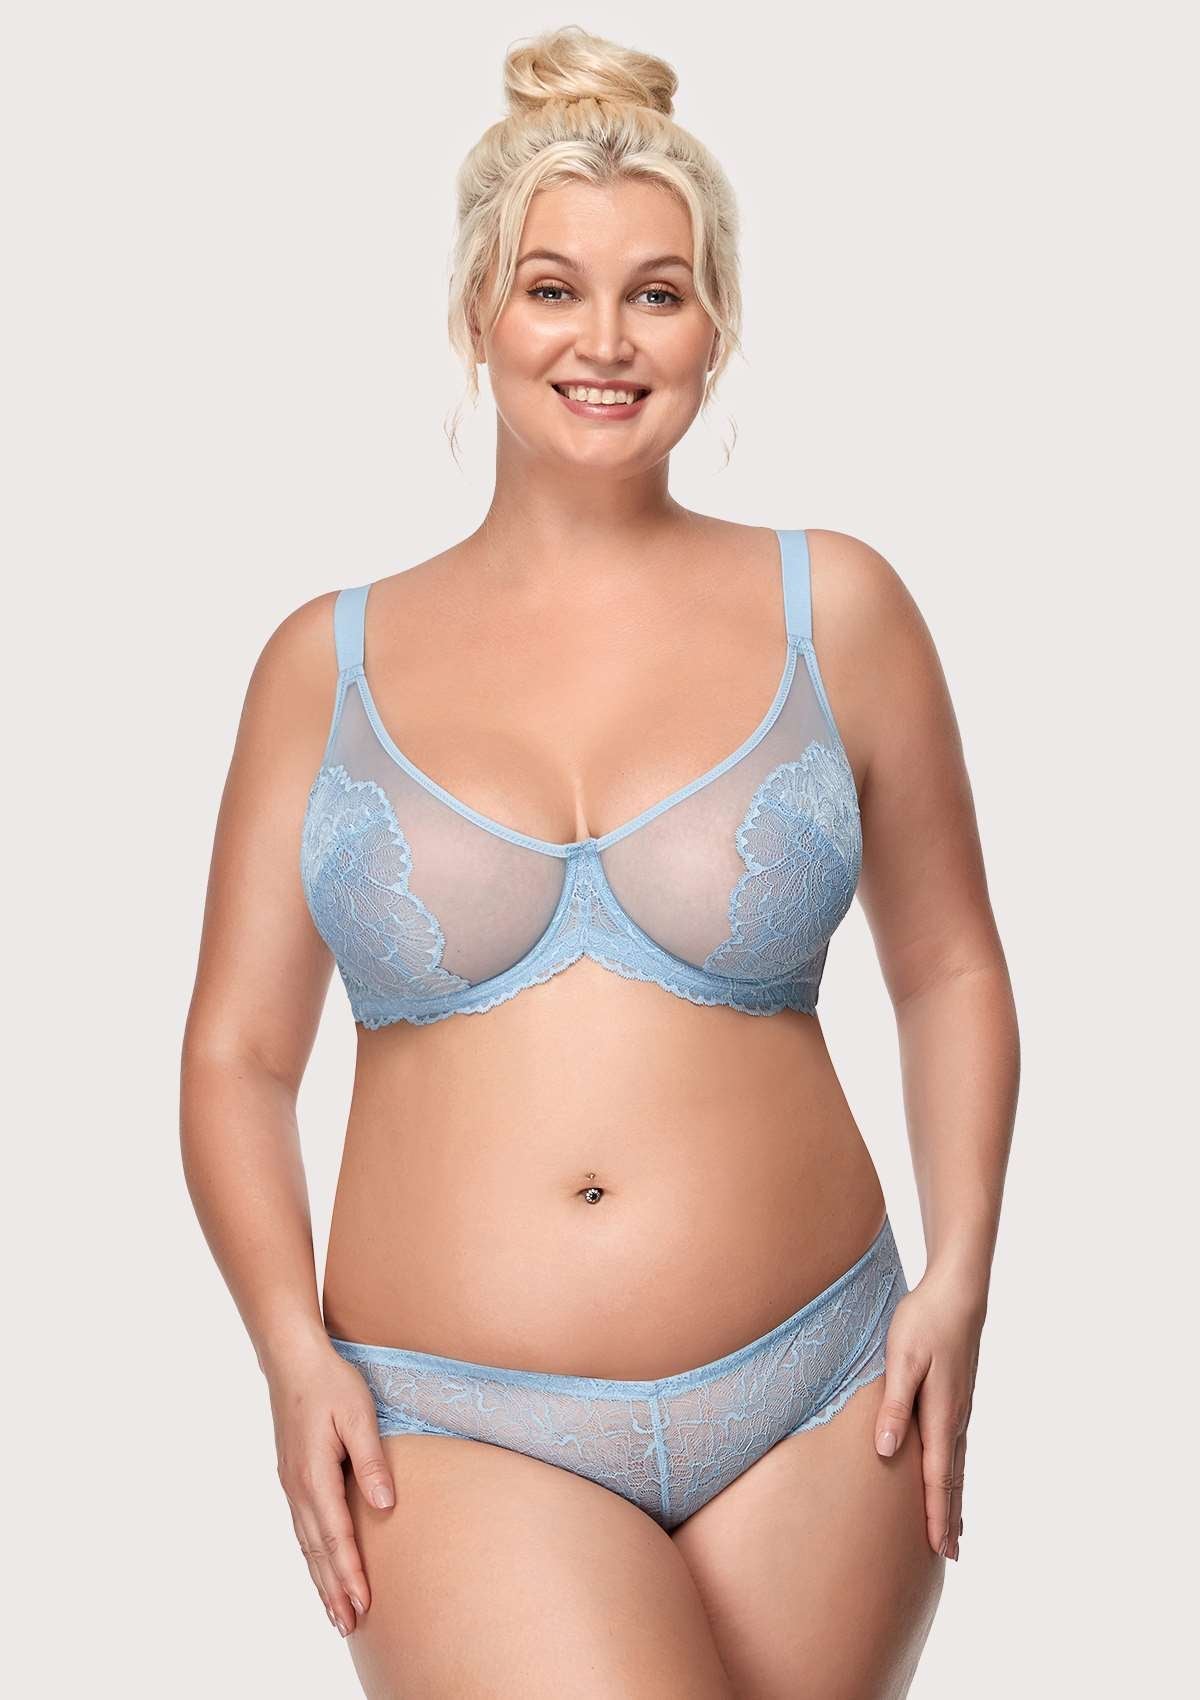 HSIA Blossom Full Coverage Supportive Unlined Underwire Bra Set - Storm Blue / 36 / DDD/F